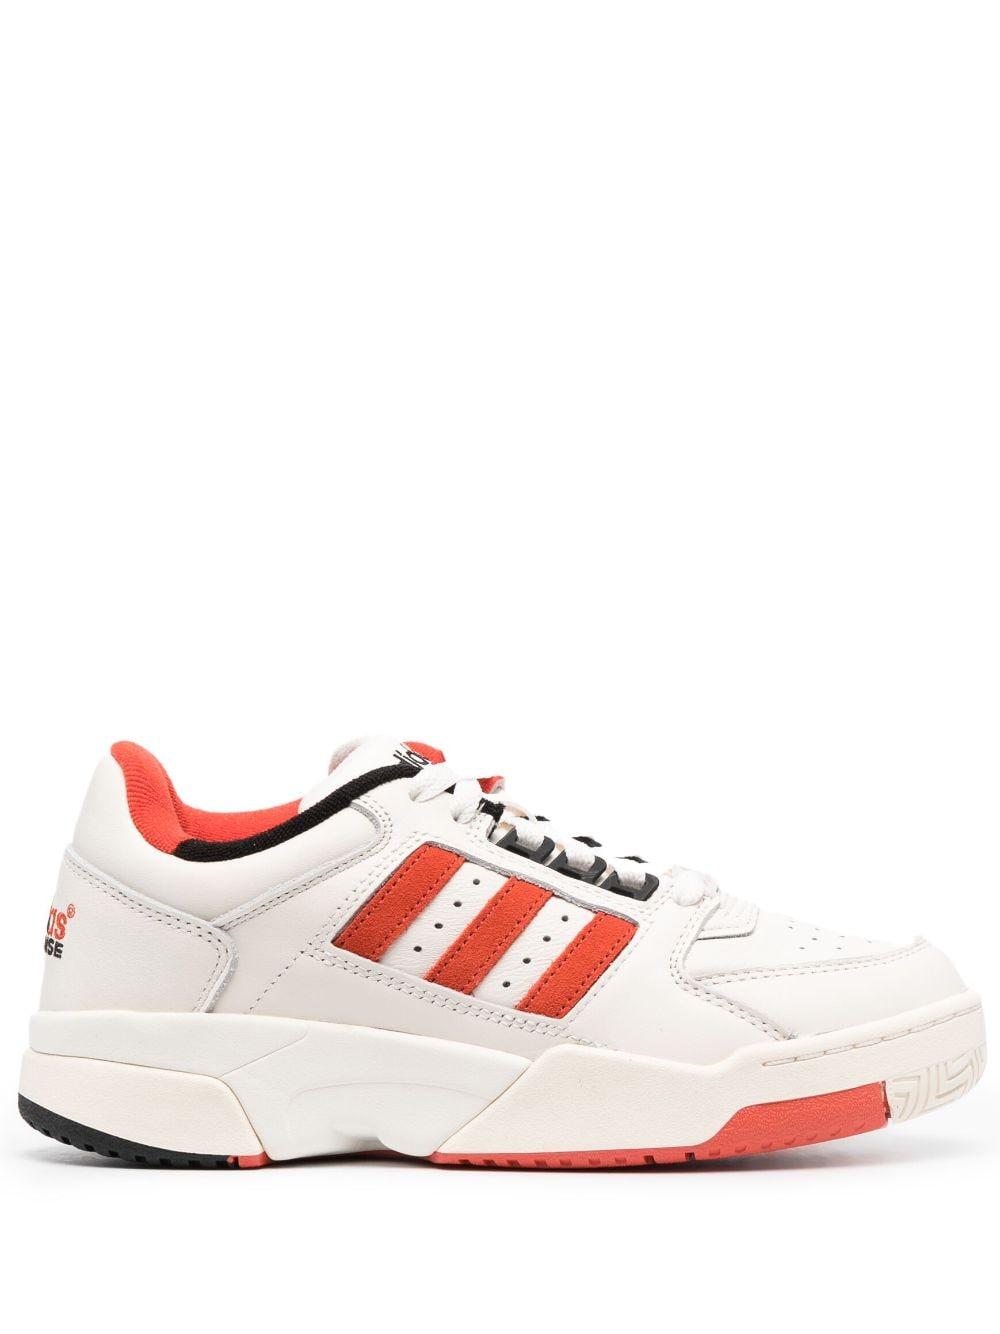 adidas Torsion Response Low-top Sneakers in Pink | Lyst